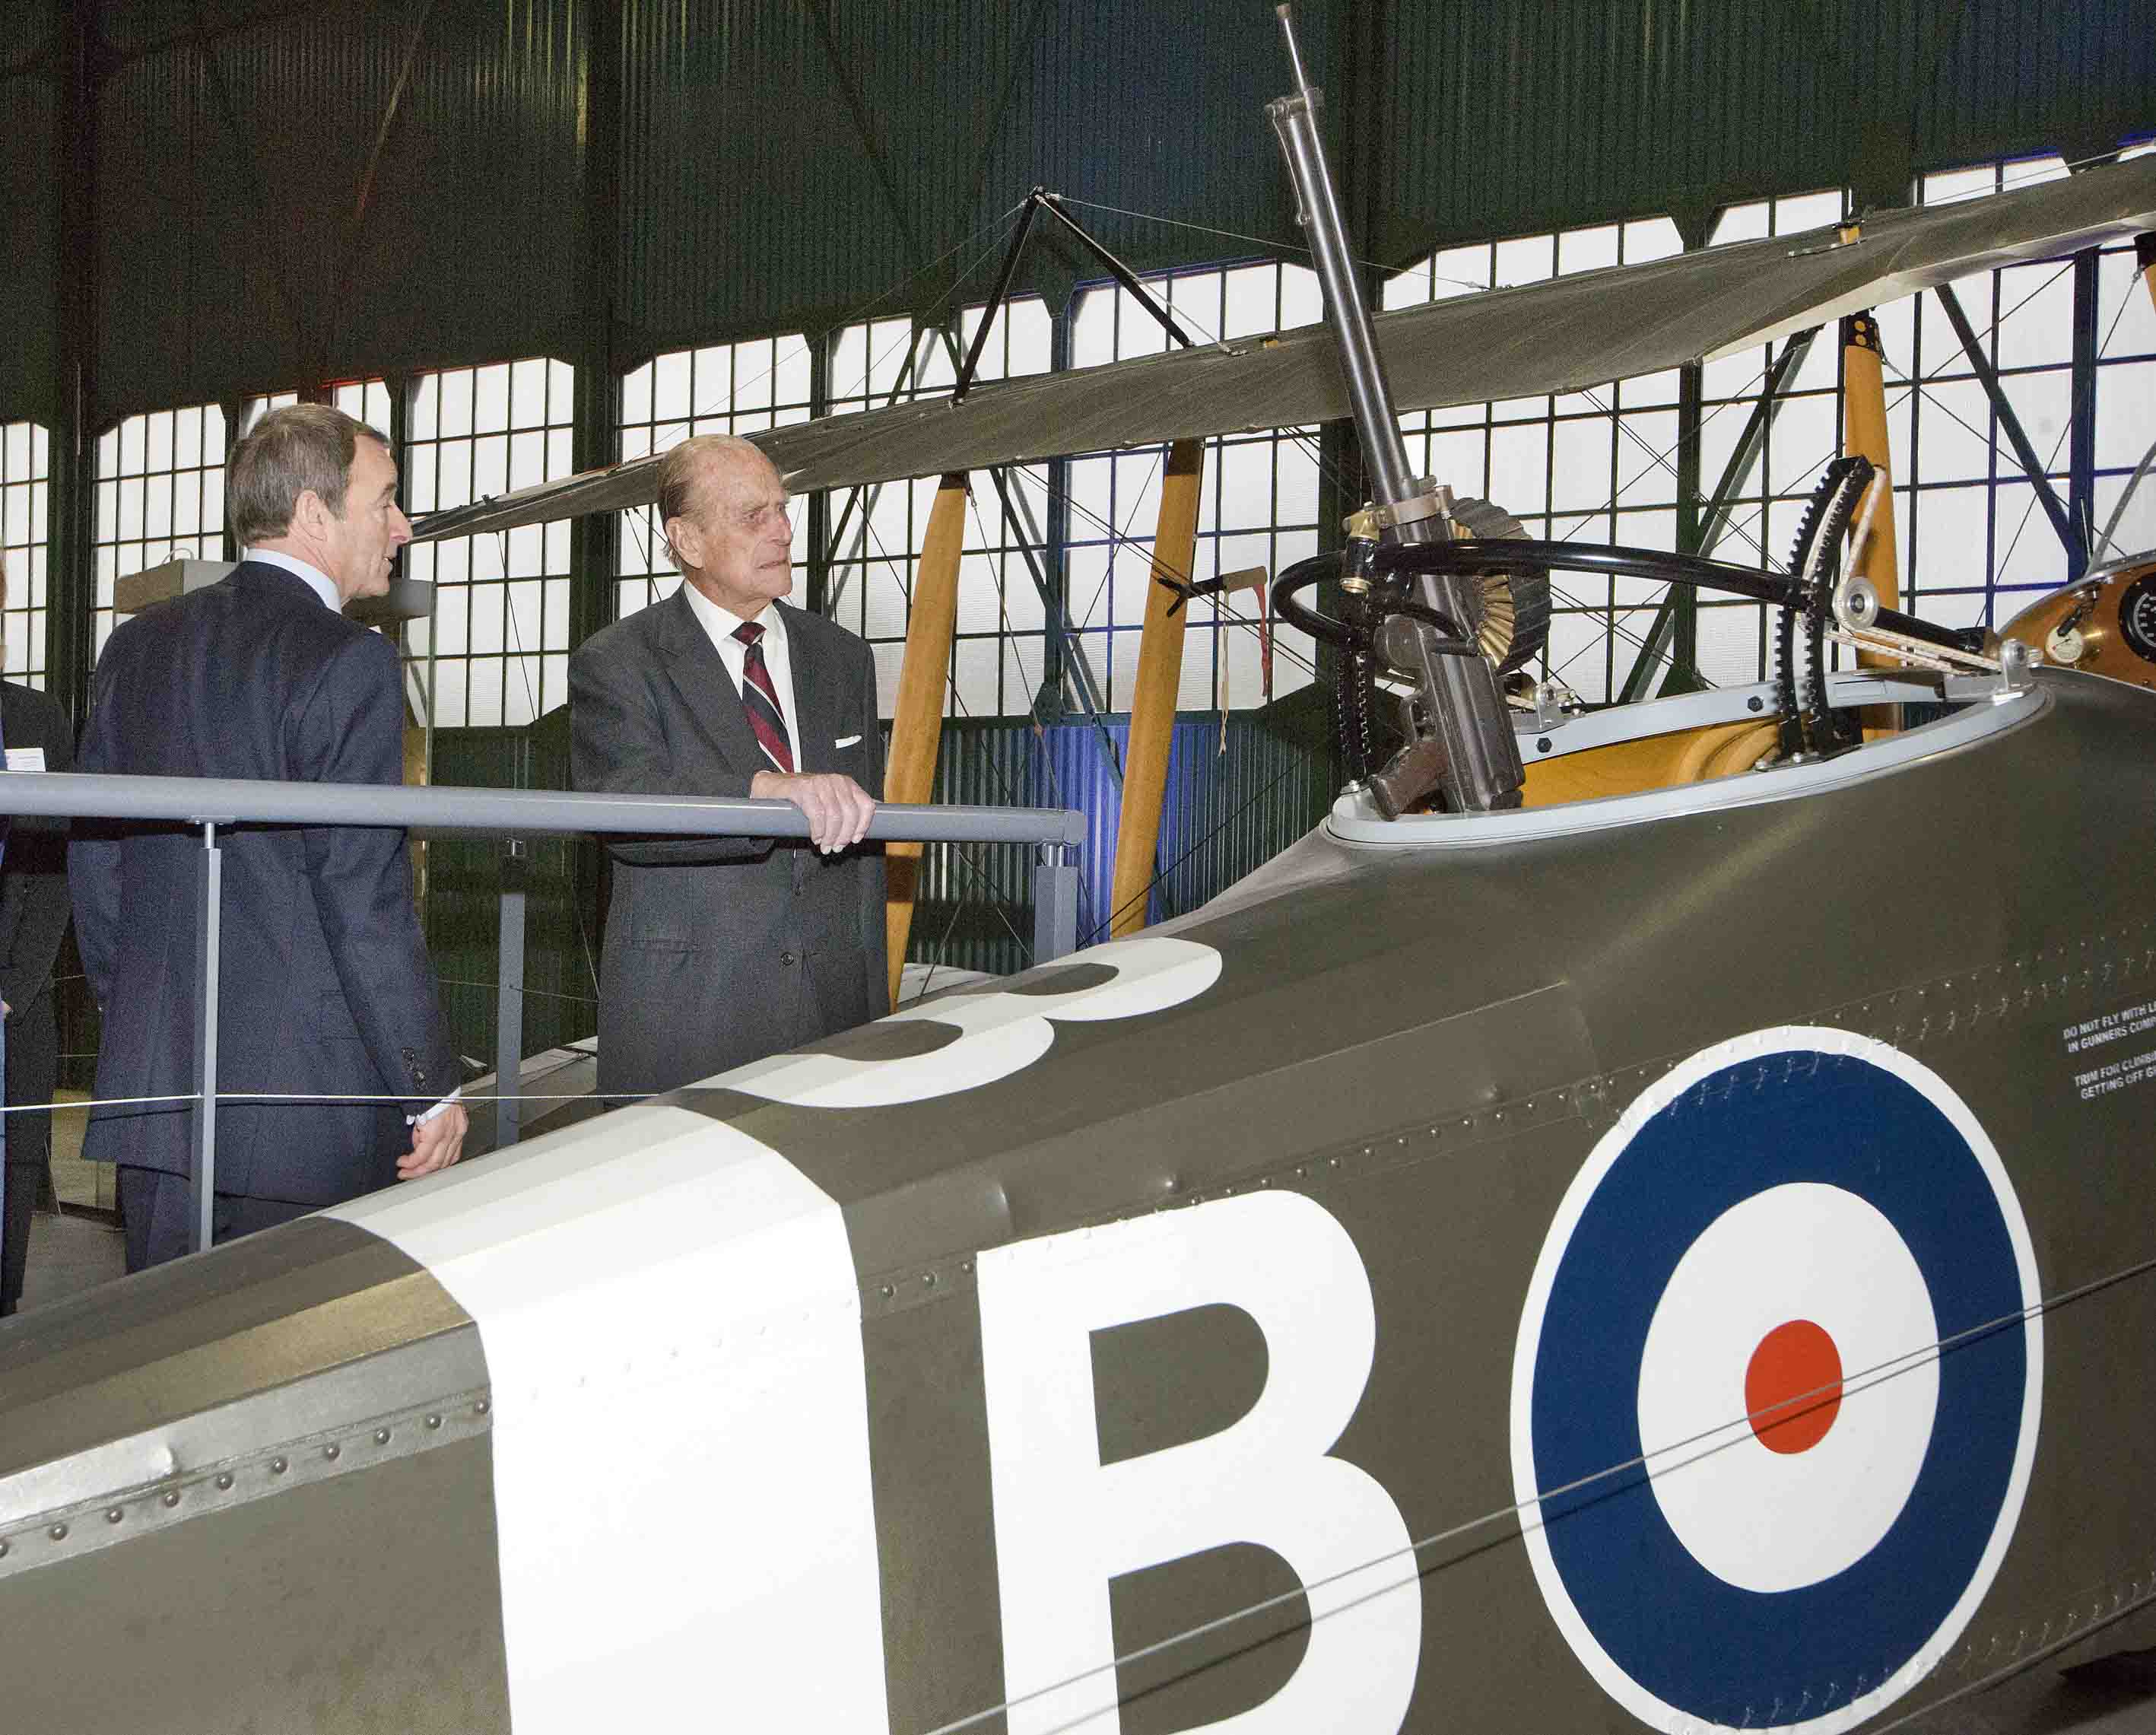 '©Trustees of the Royal Air Force Museum’